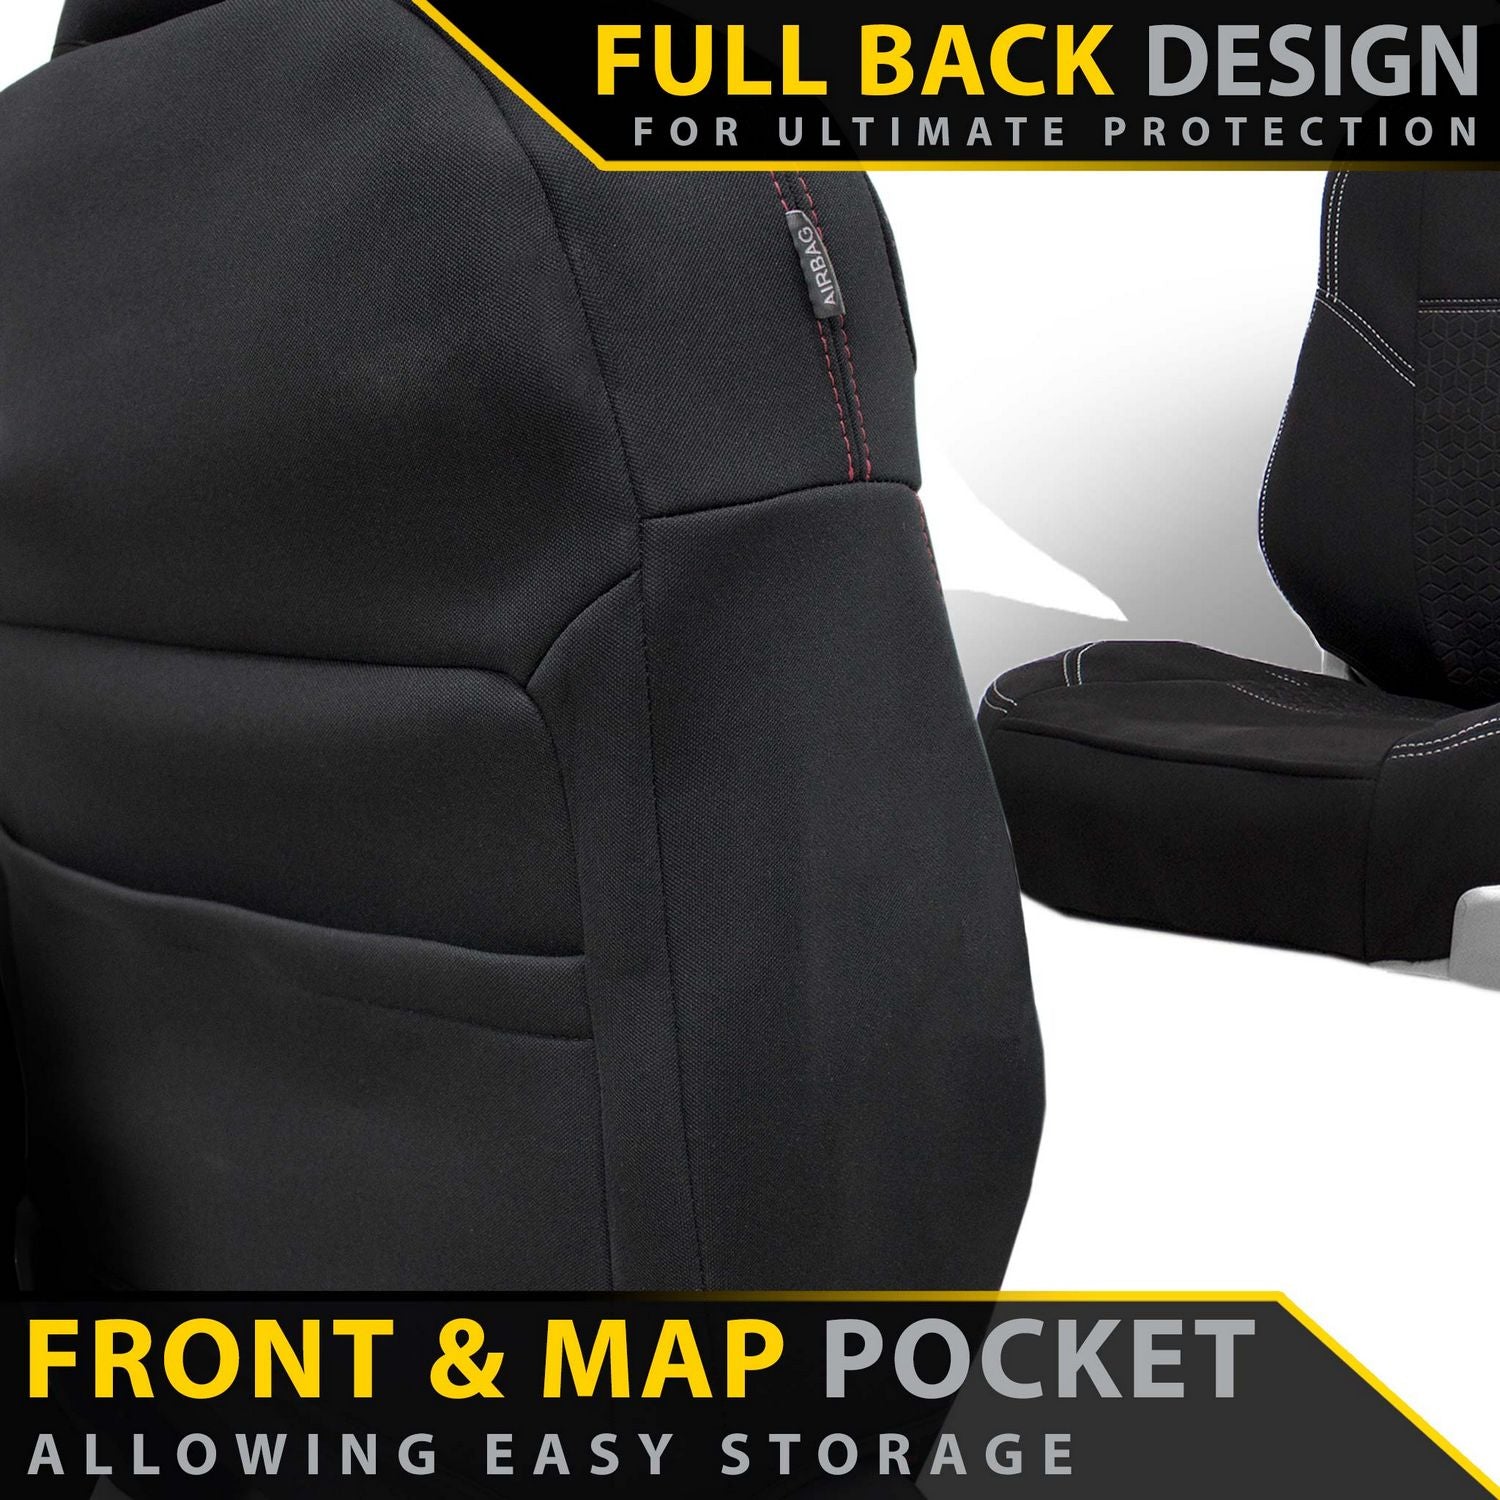 Mercedes-Benz X-Class Premium Neoprene 2x Front Seat Covers (Made to Order)